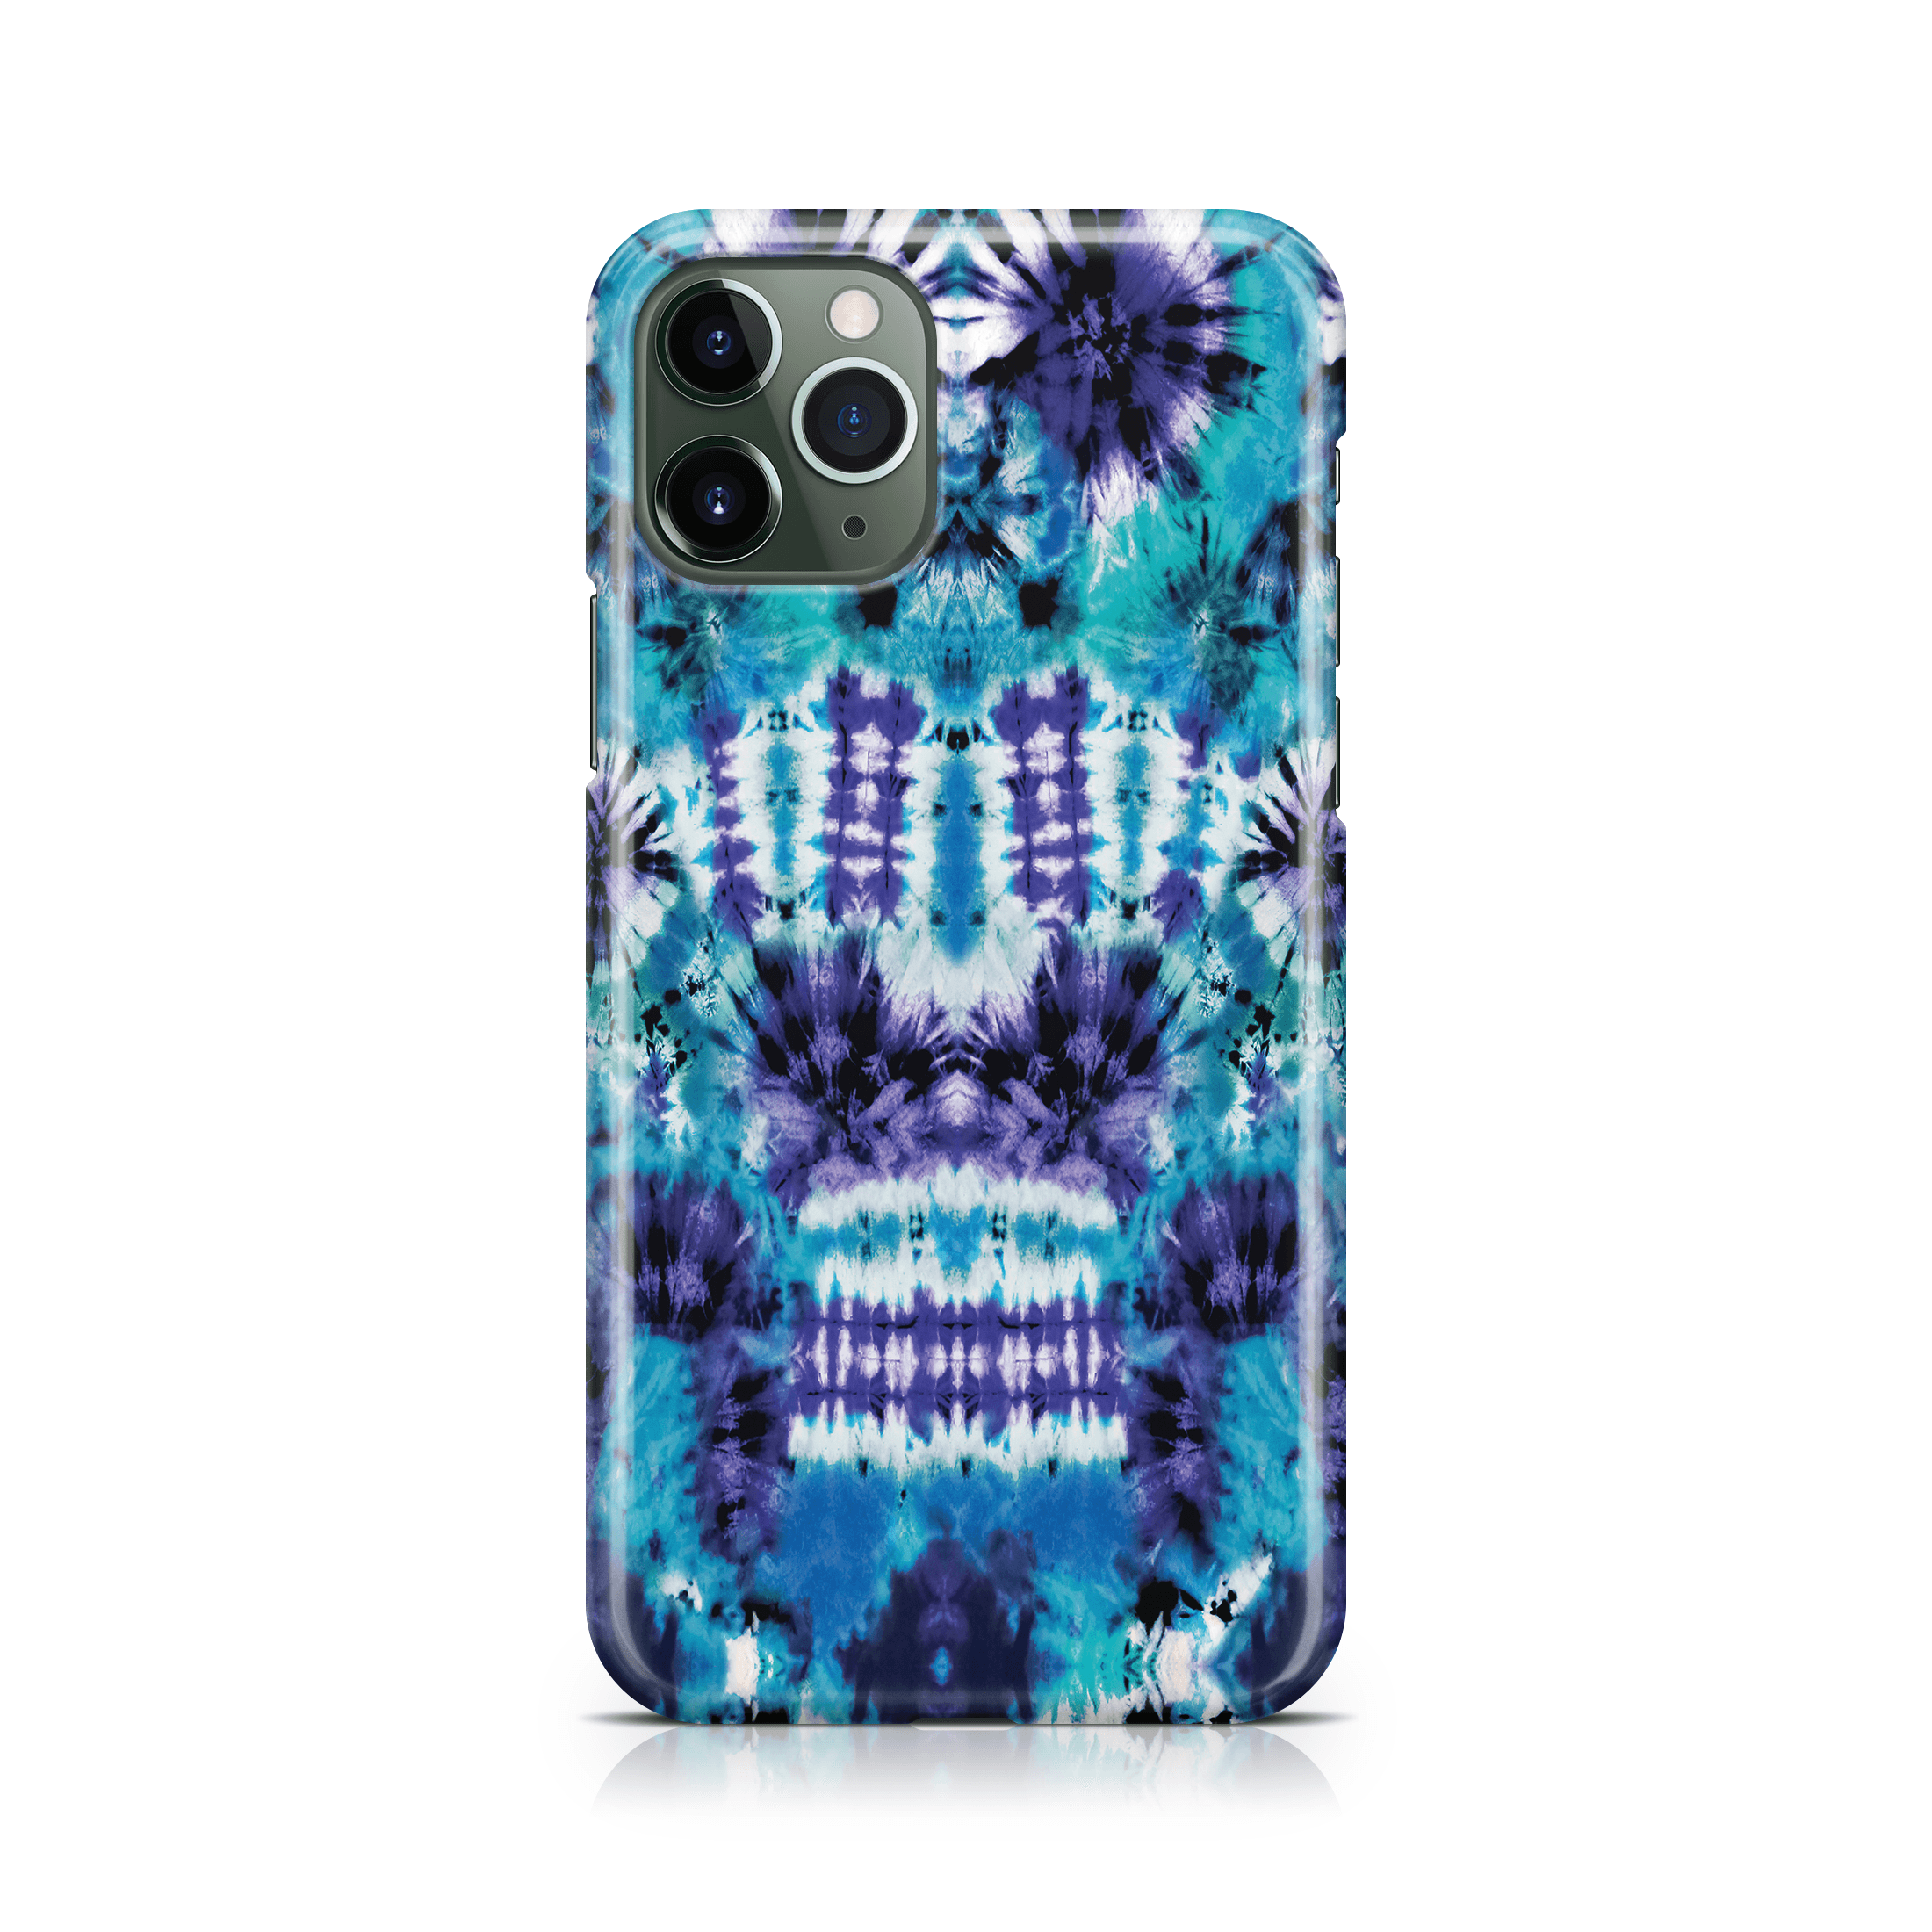 Blue Tie Dye - iPhone phone case designs by CaseSwagger